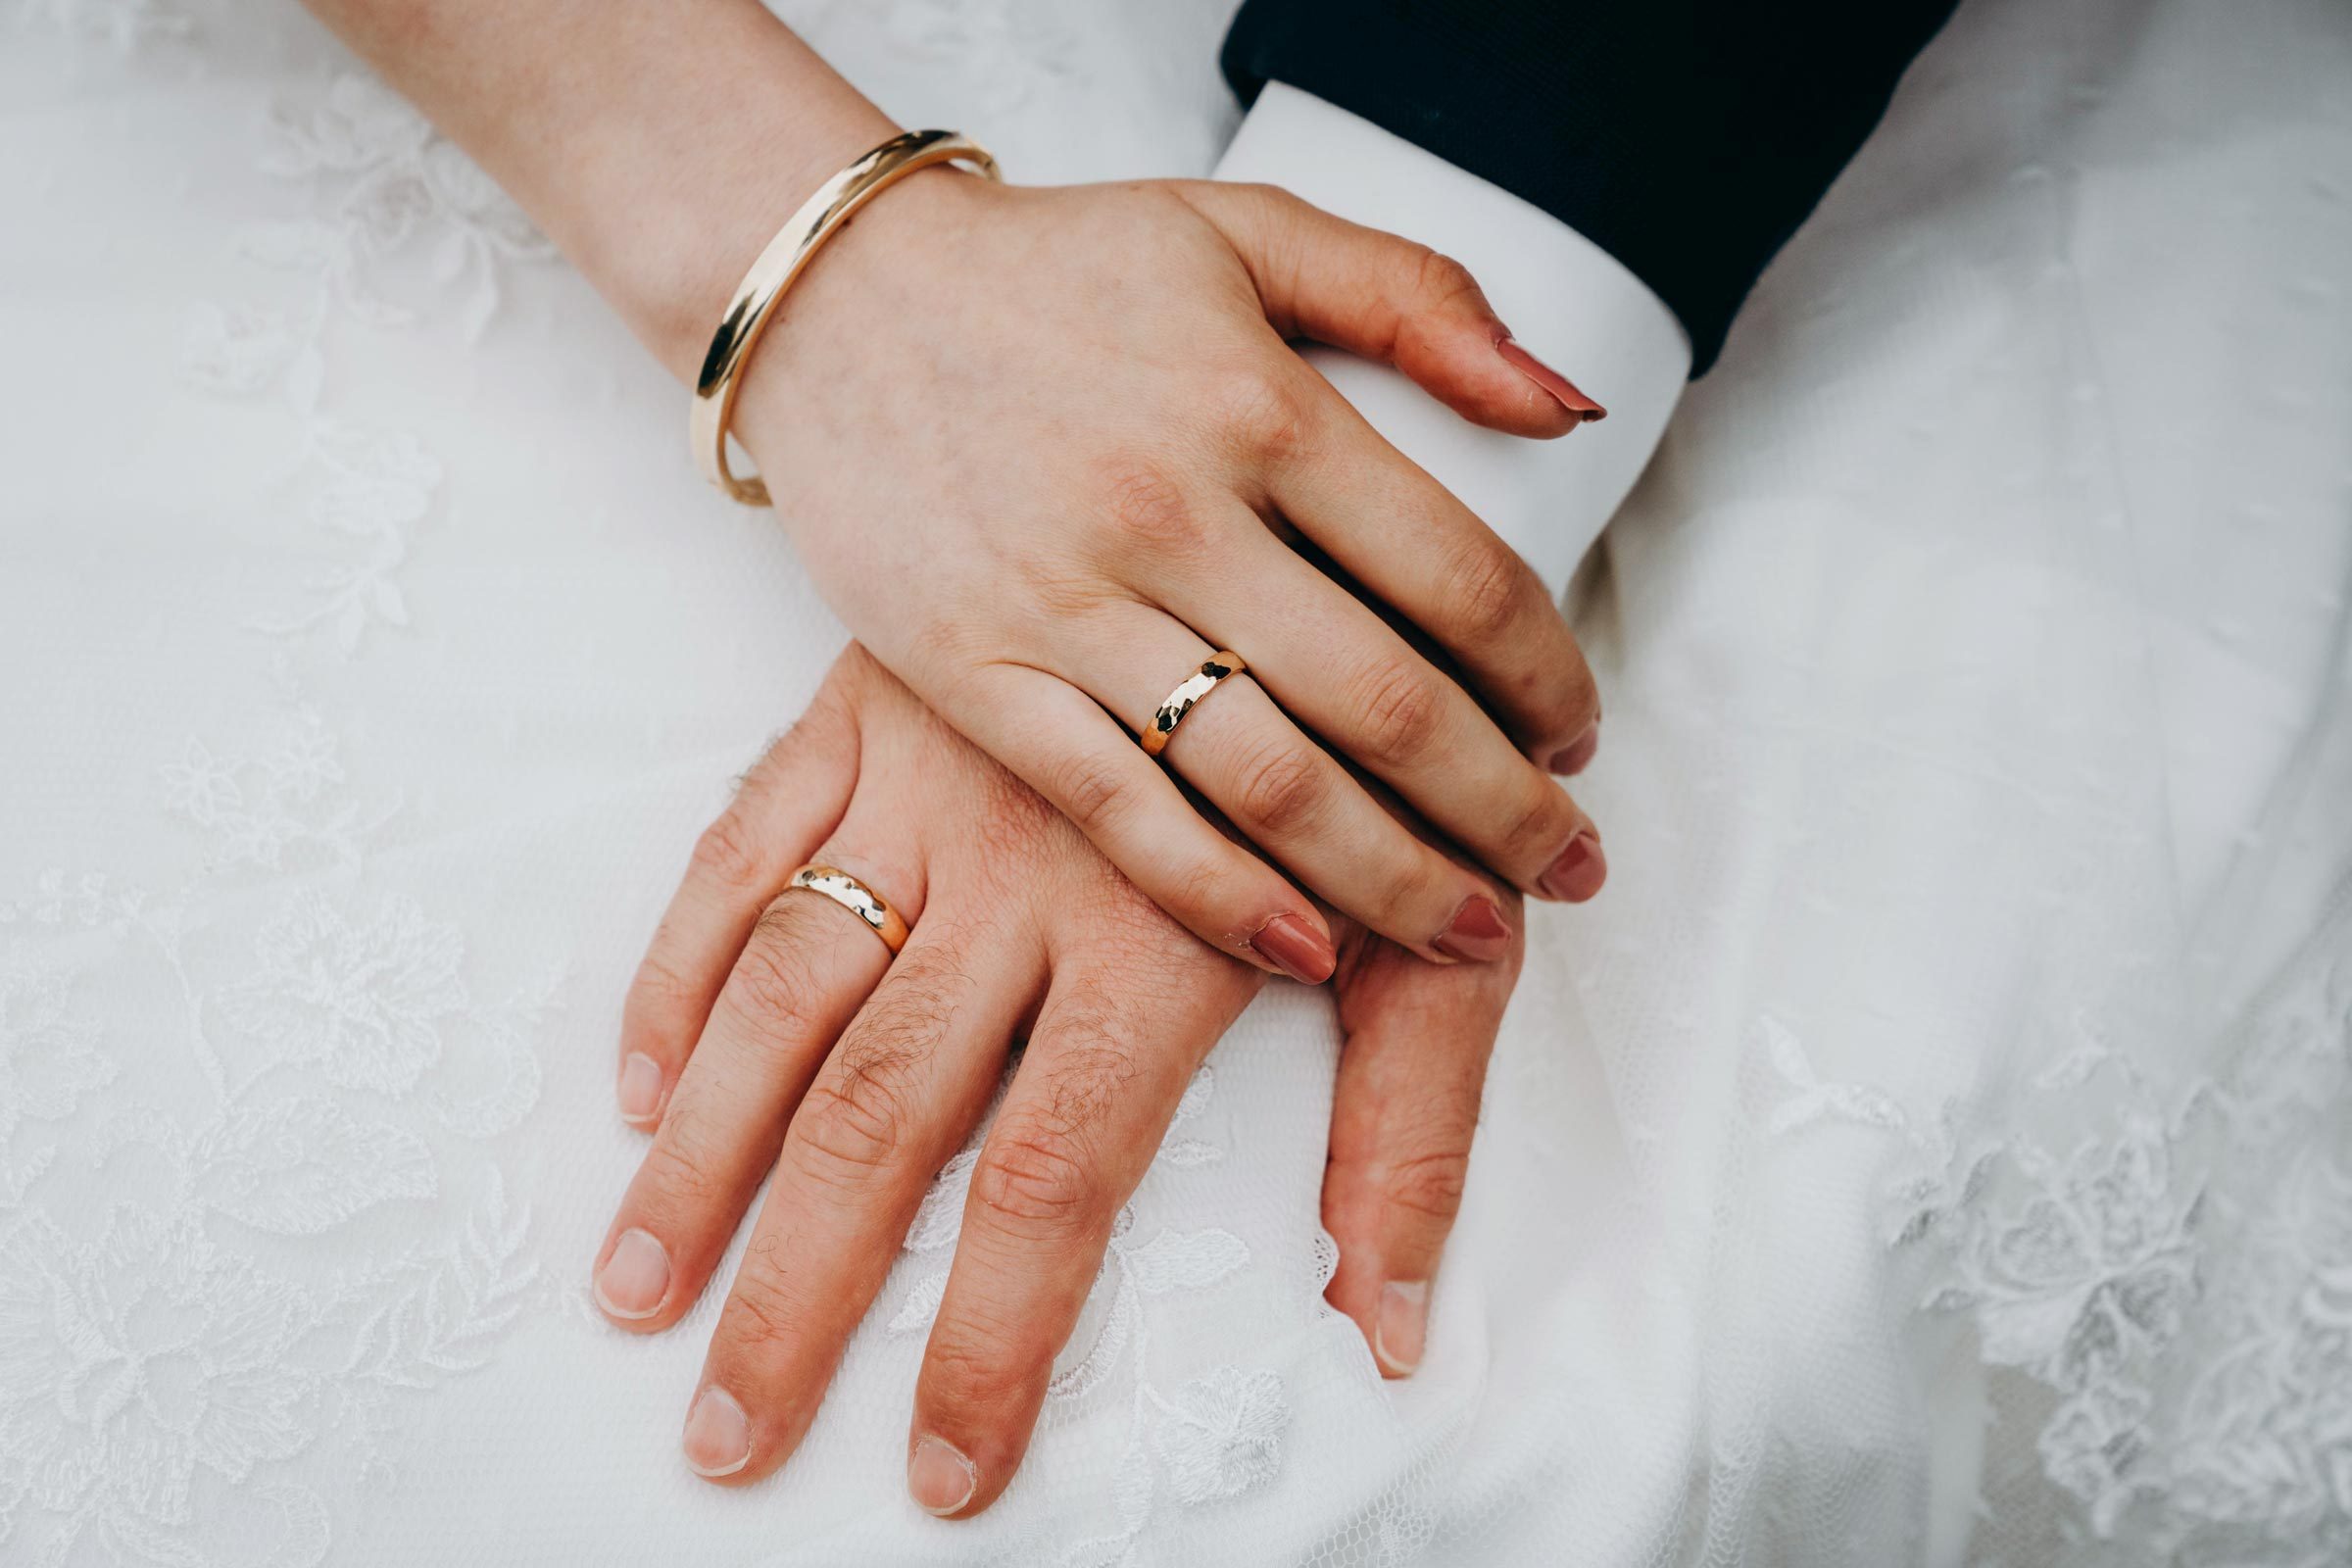 The Ring Finger: History of Wearing Wedding Rings on the Fourth Finger